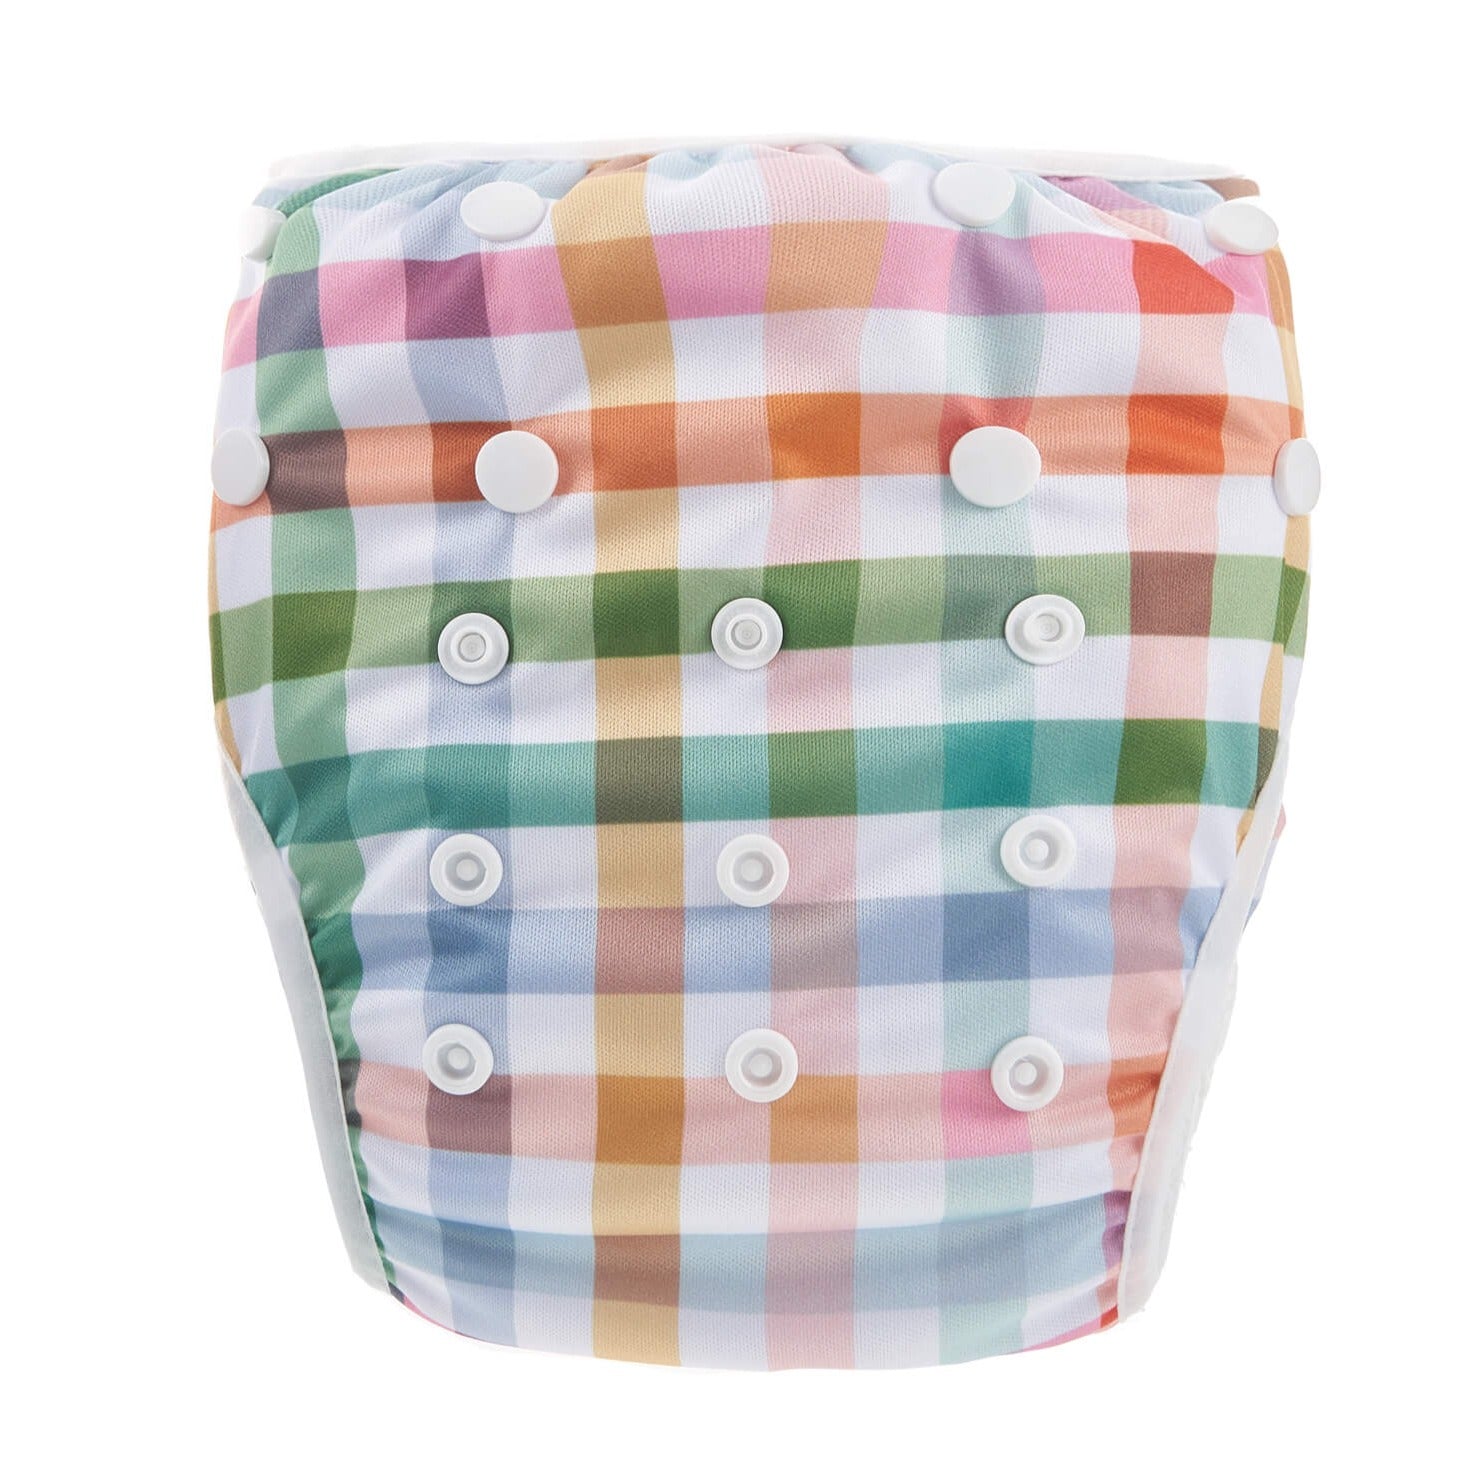 Picnic Gingham Reusable Swim Nappy from Bear & Moo